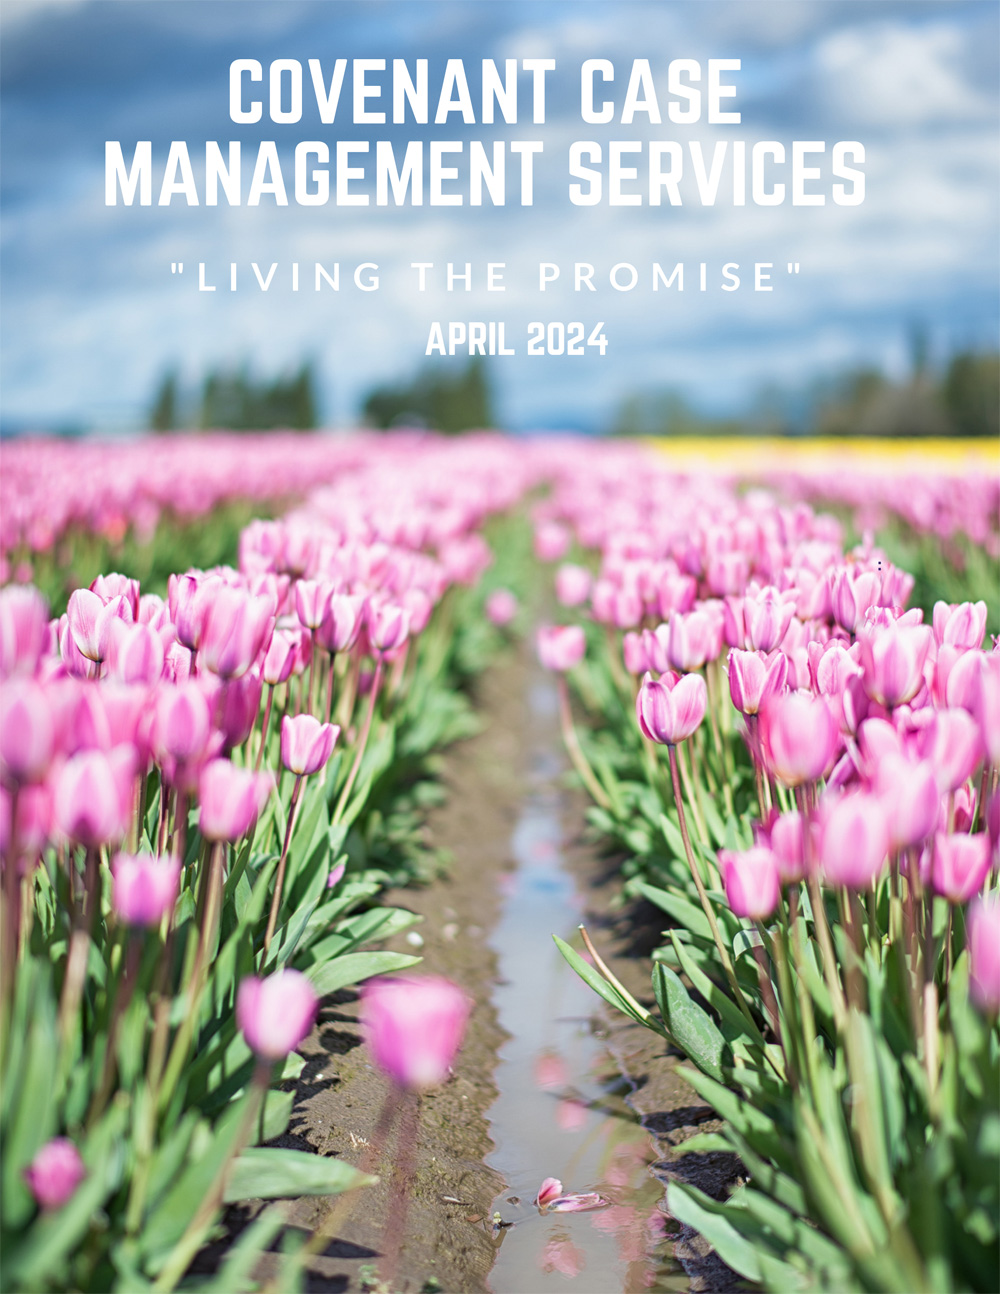 Arpil 2024 Newsletter from Covenant Case Management Services